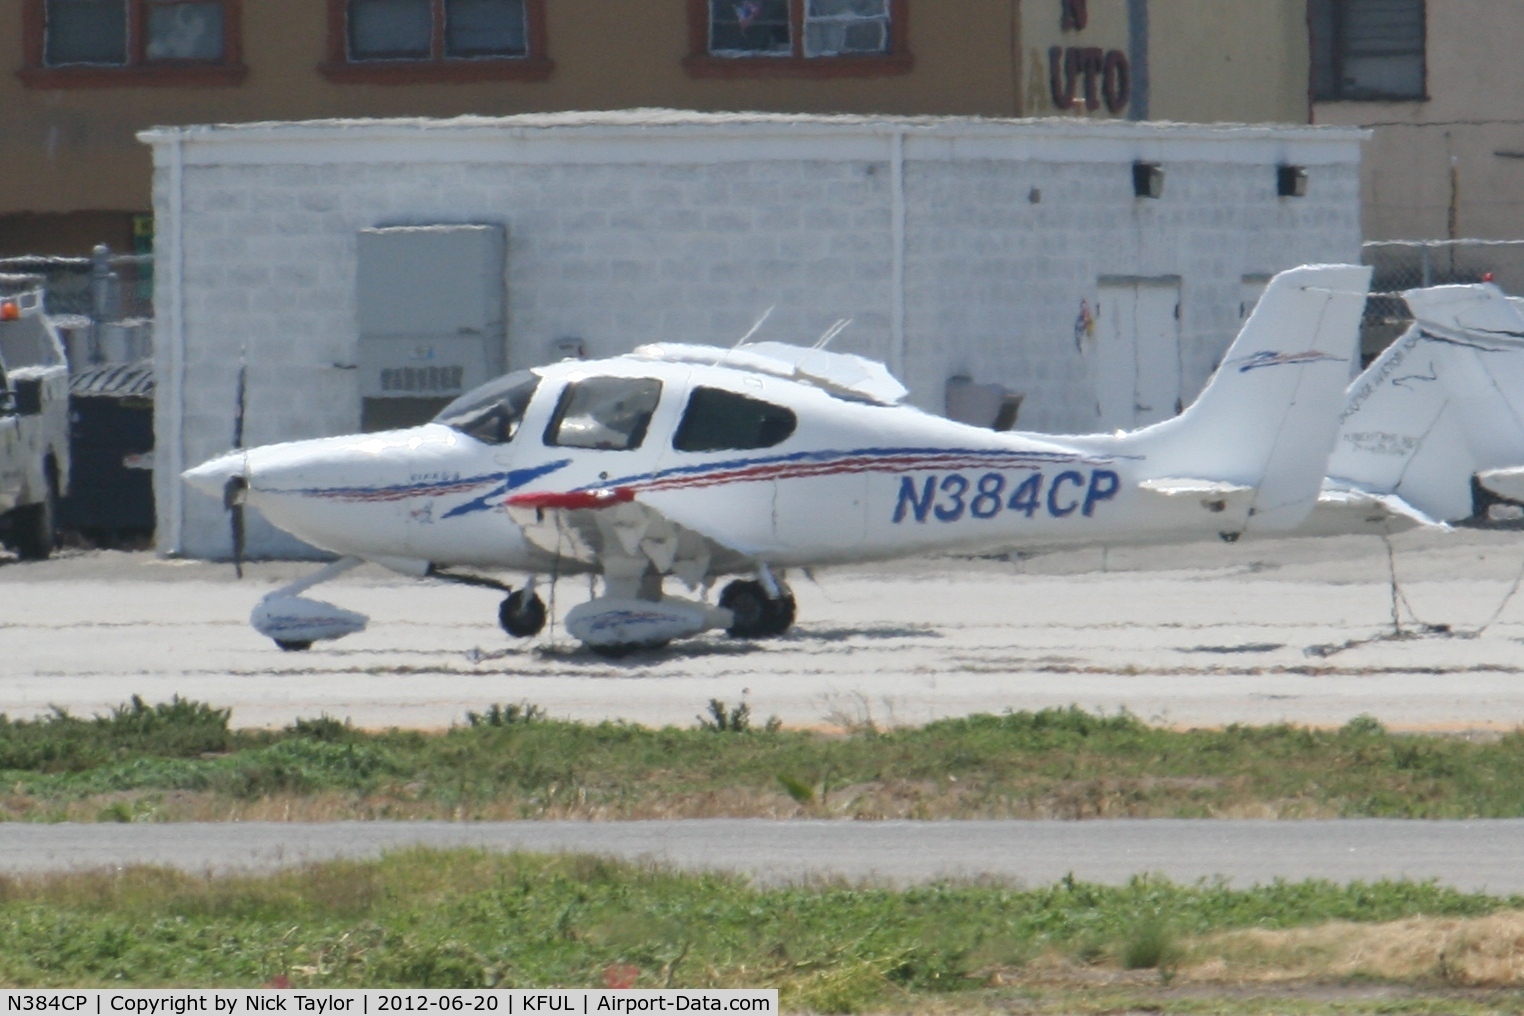 N384CP, 2007 Cirrus SR20 C/N 1872, Parked by the tower